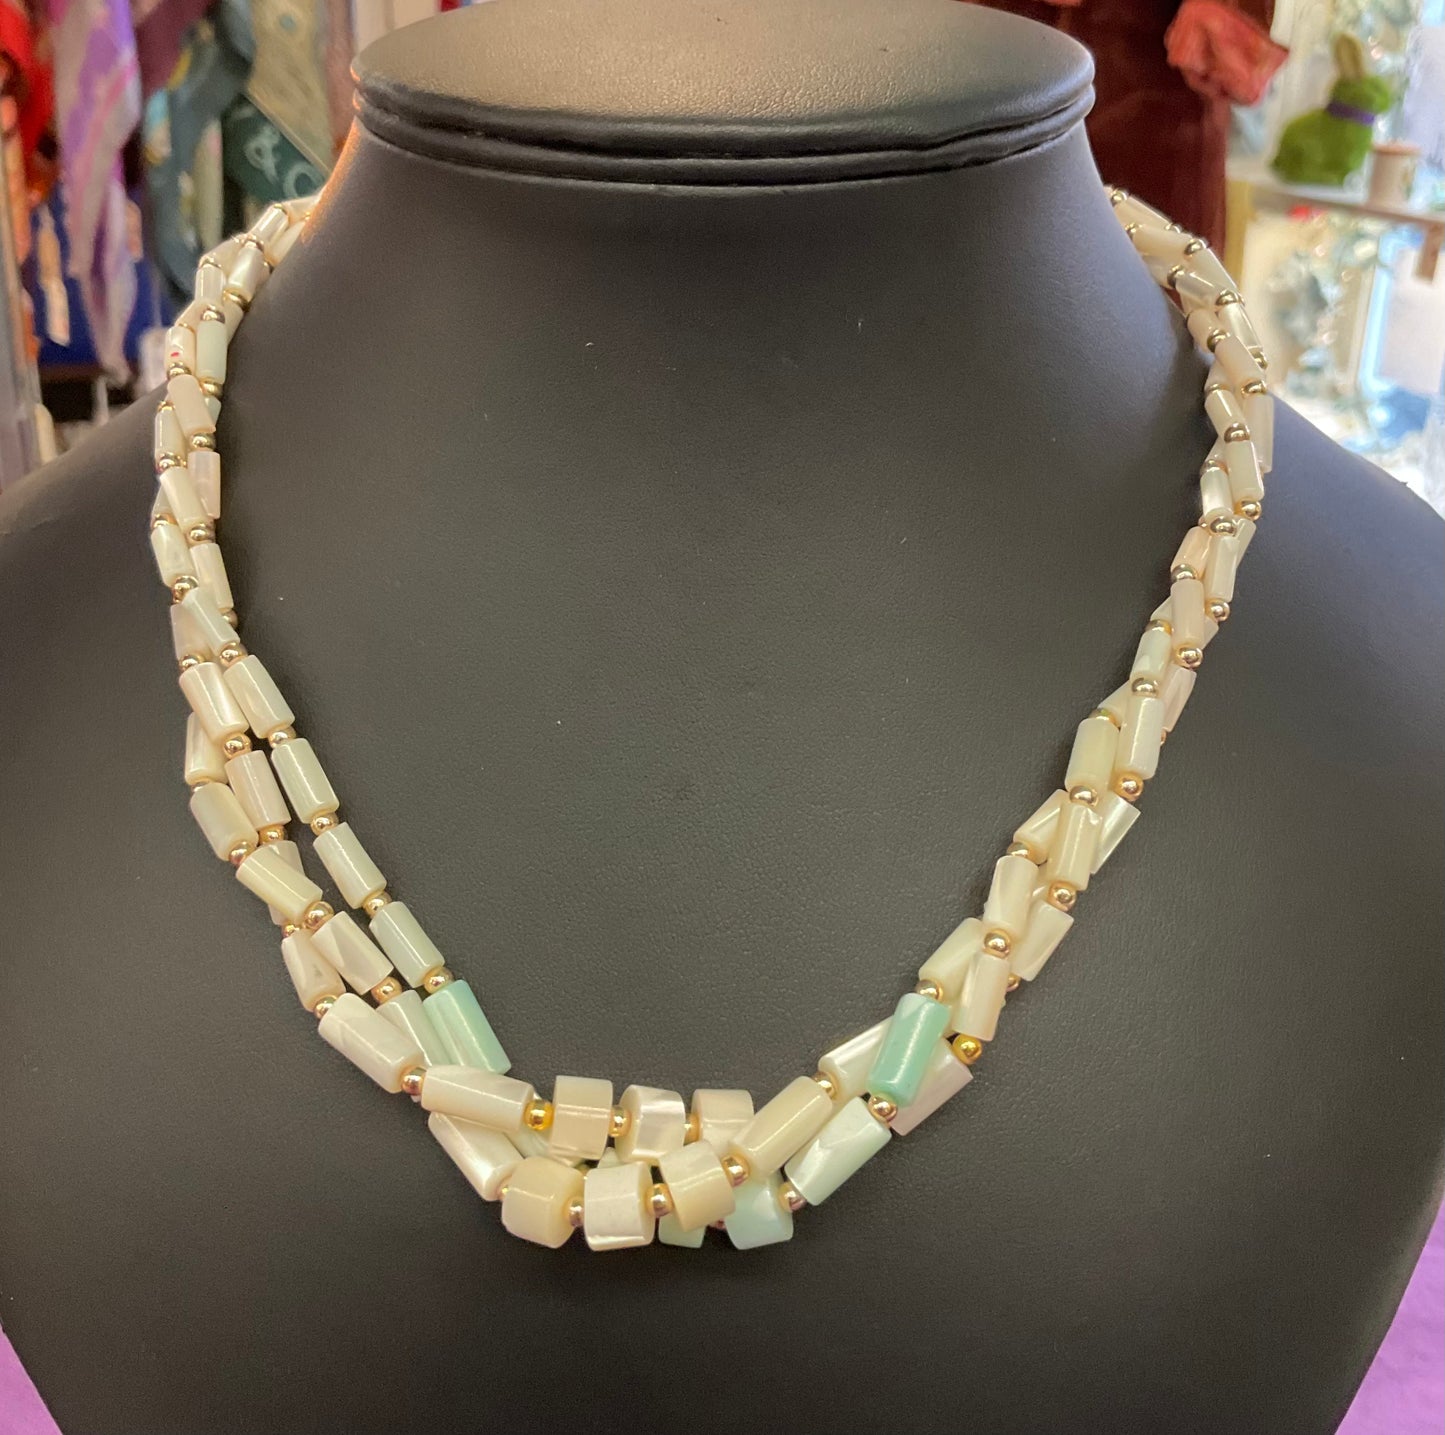 Vintage Mother of pearl twisted beaded necklace with pale aqua centre. prom, wedding.